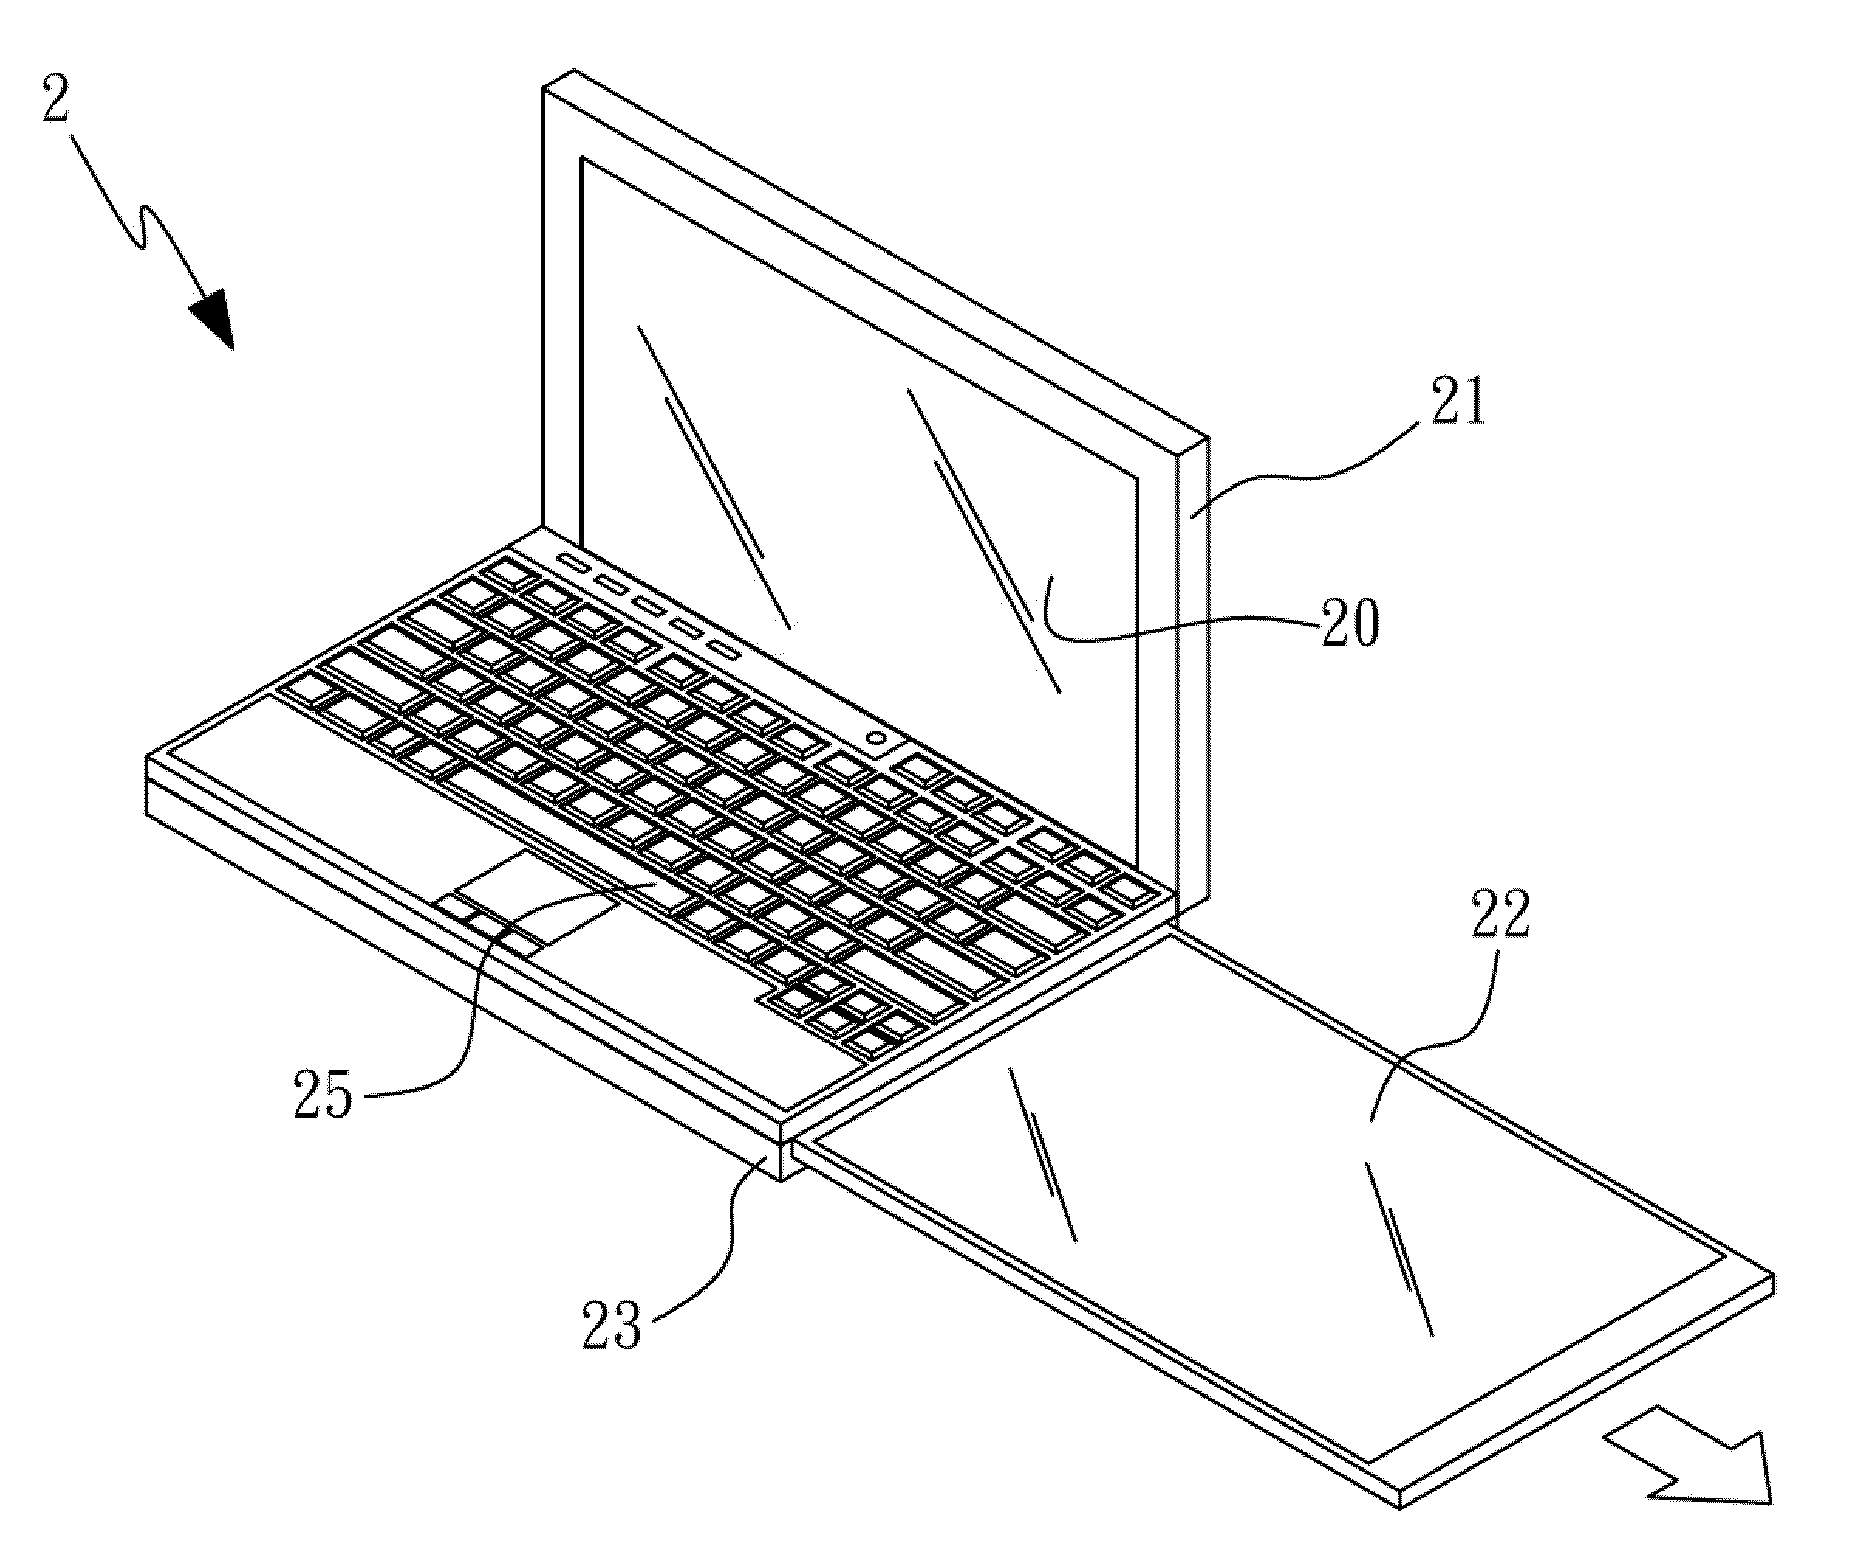 Mobile device with multiple display screens